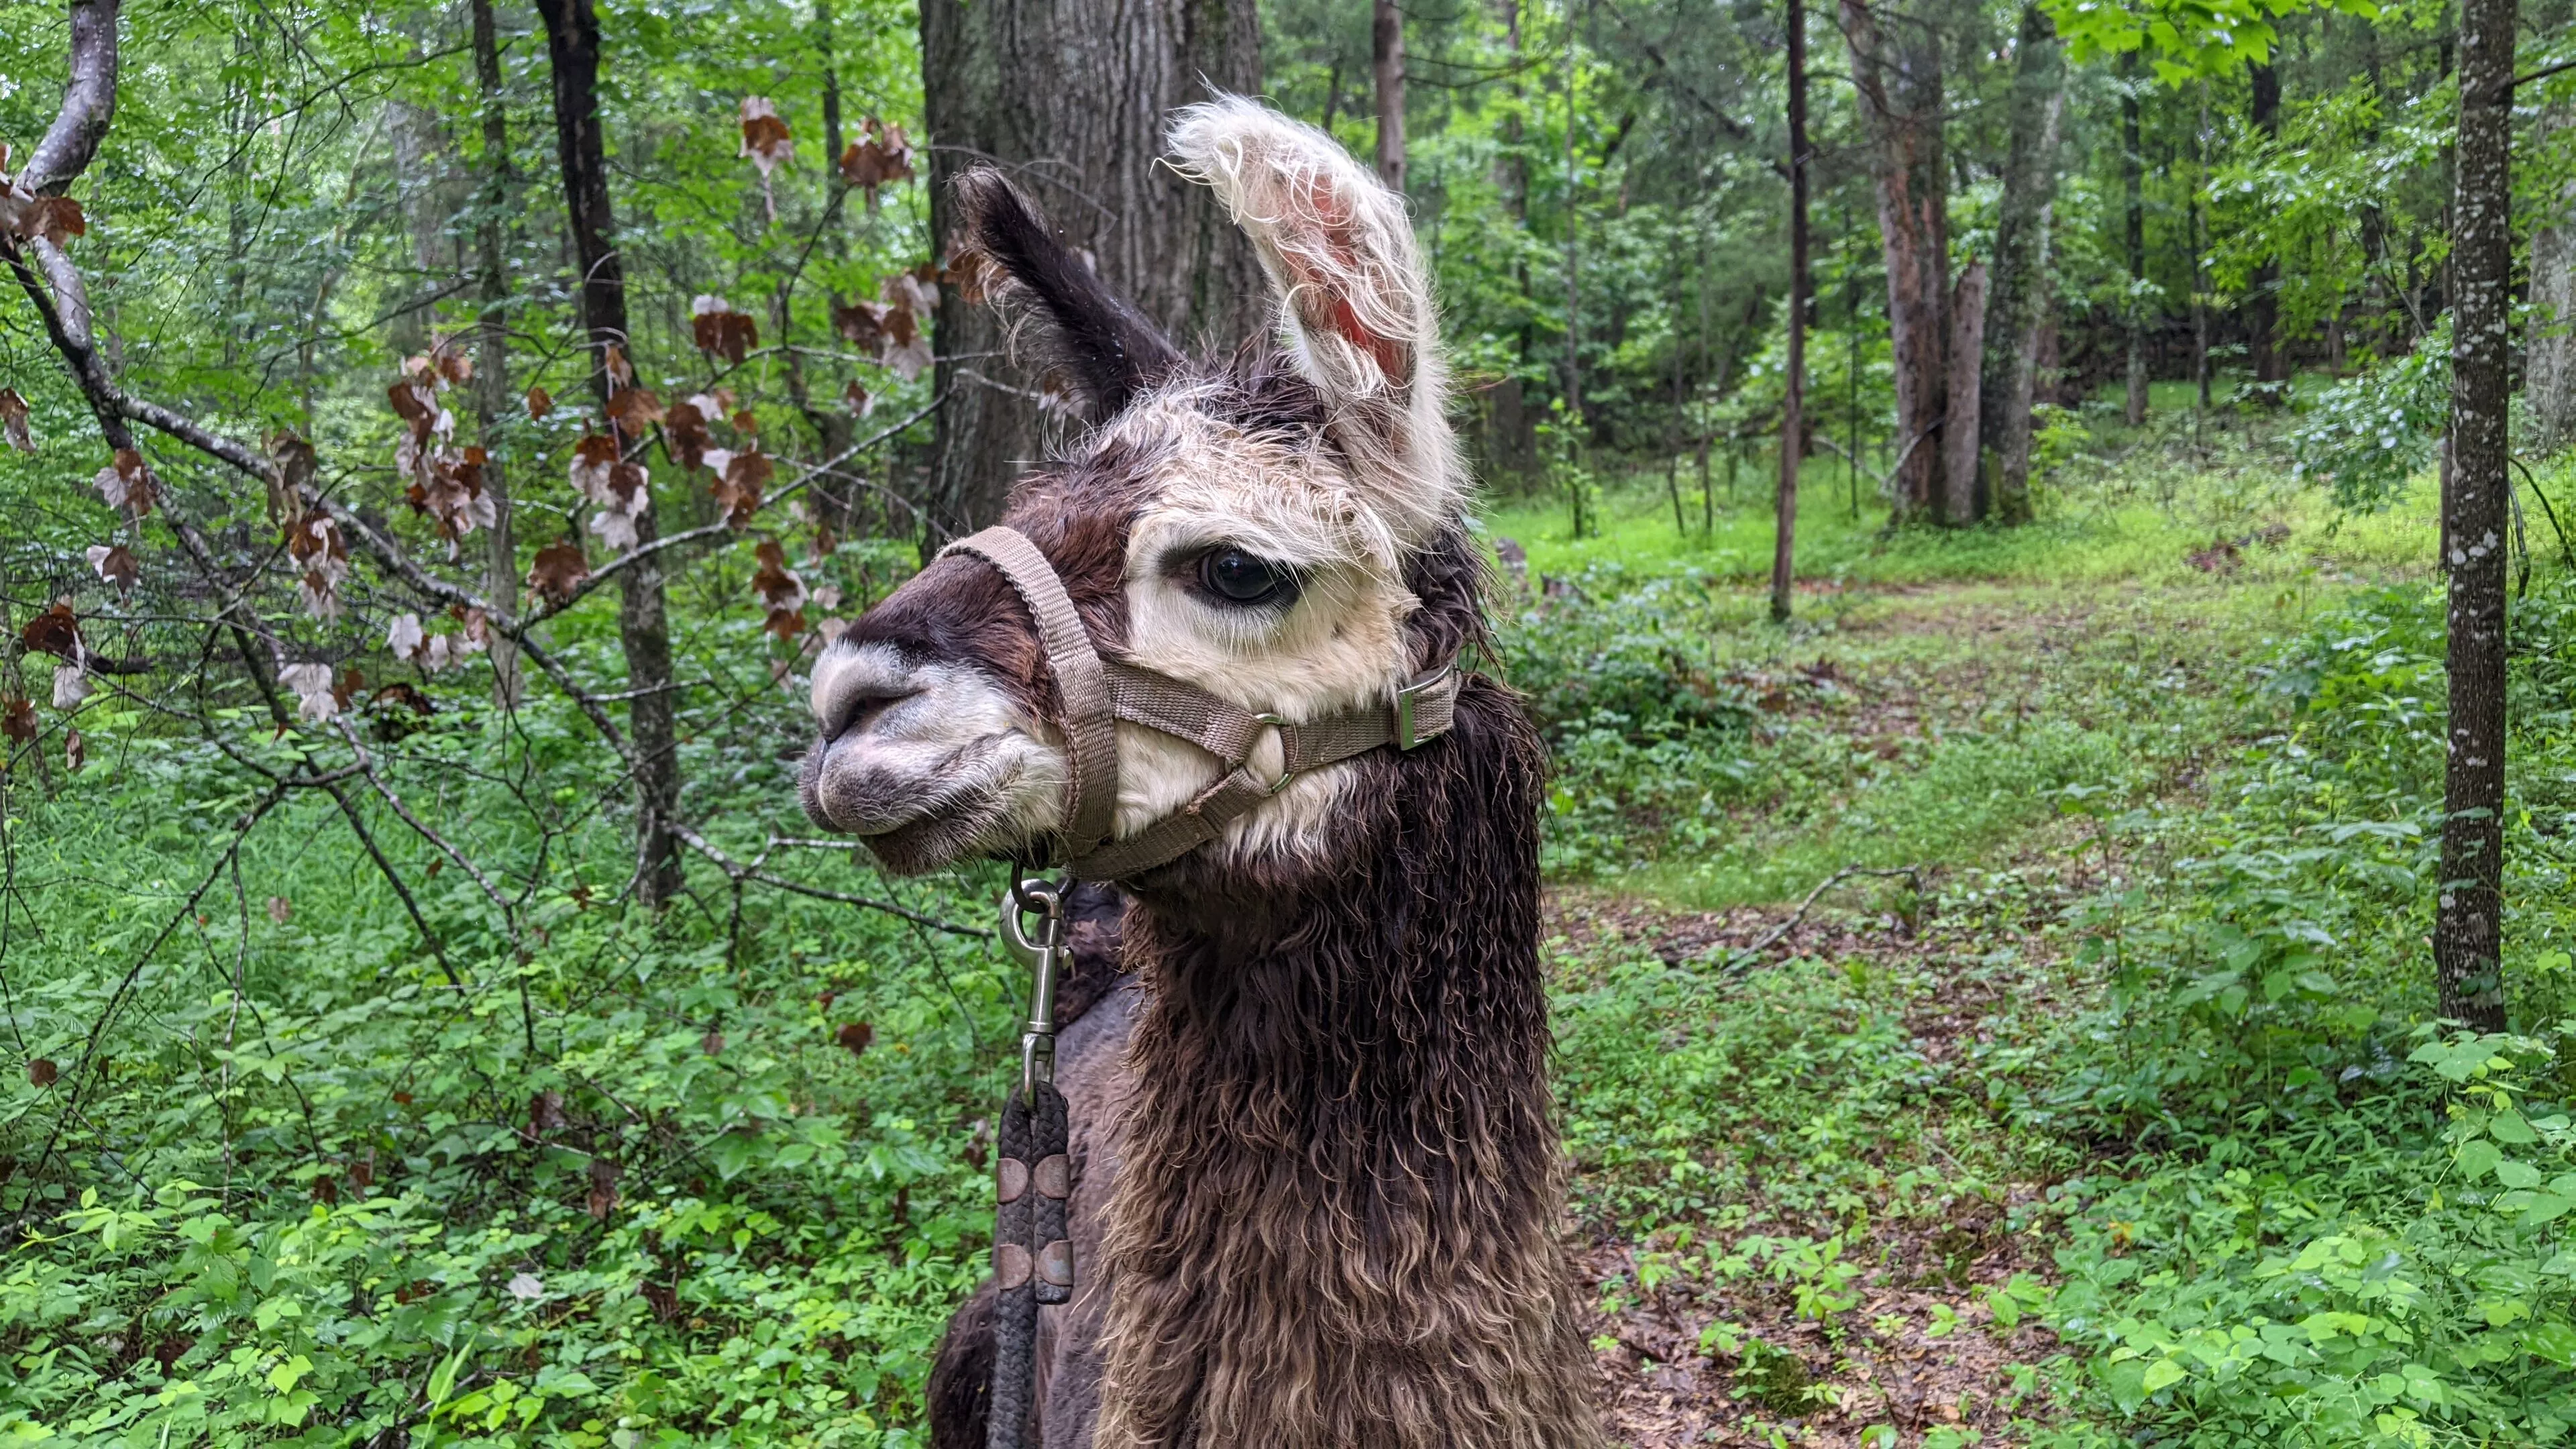 An image of a llama named Kabooki in a forest